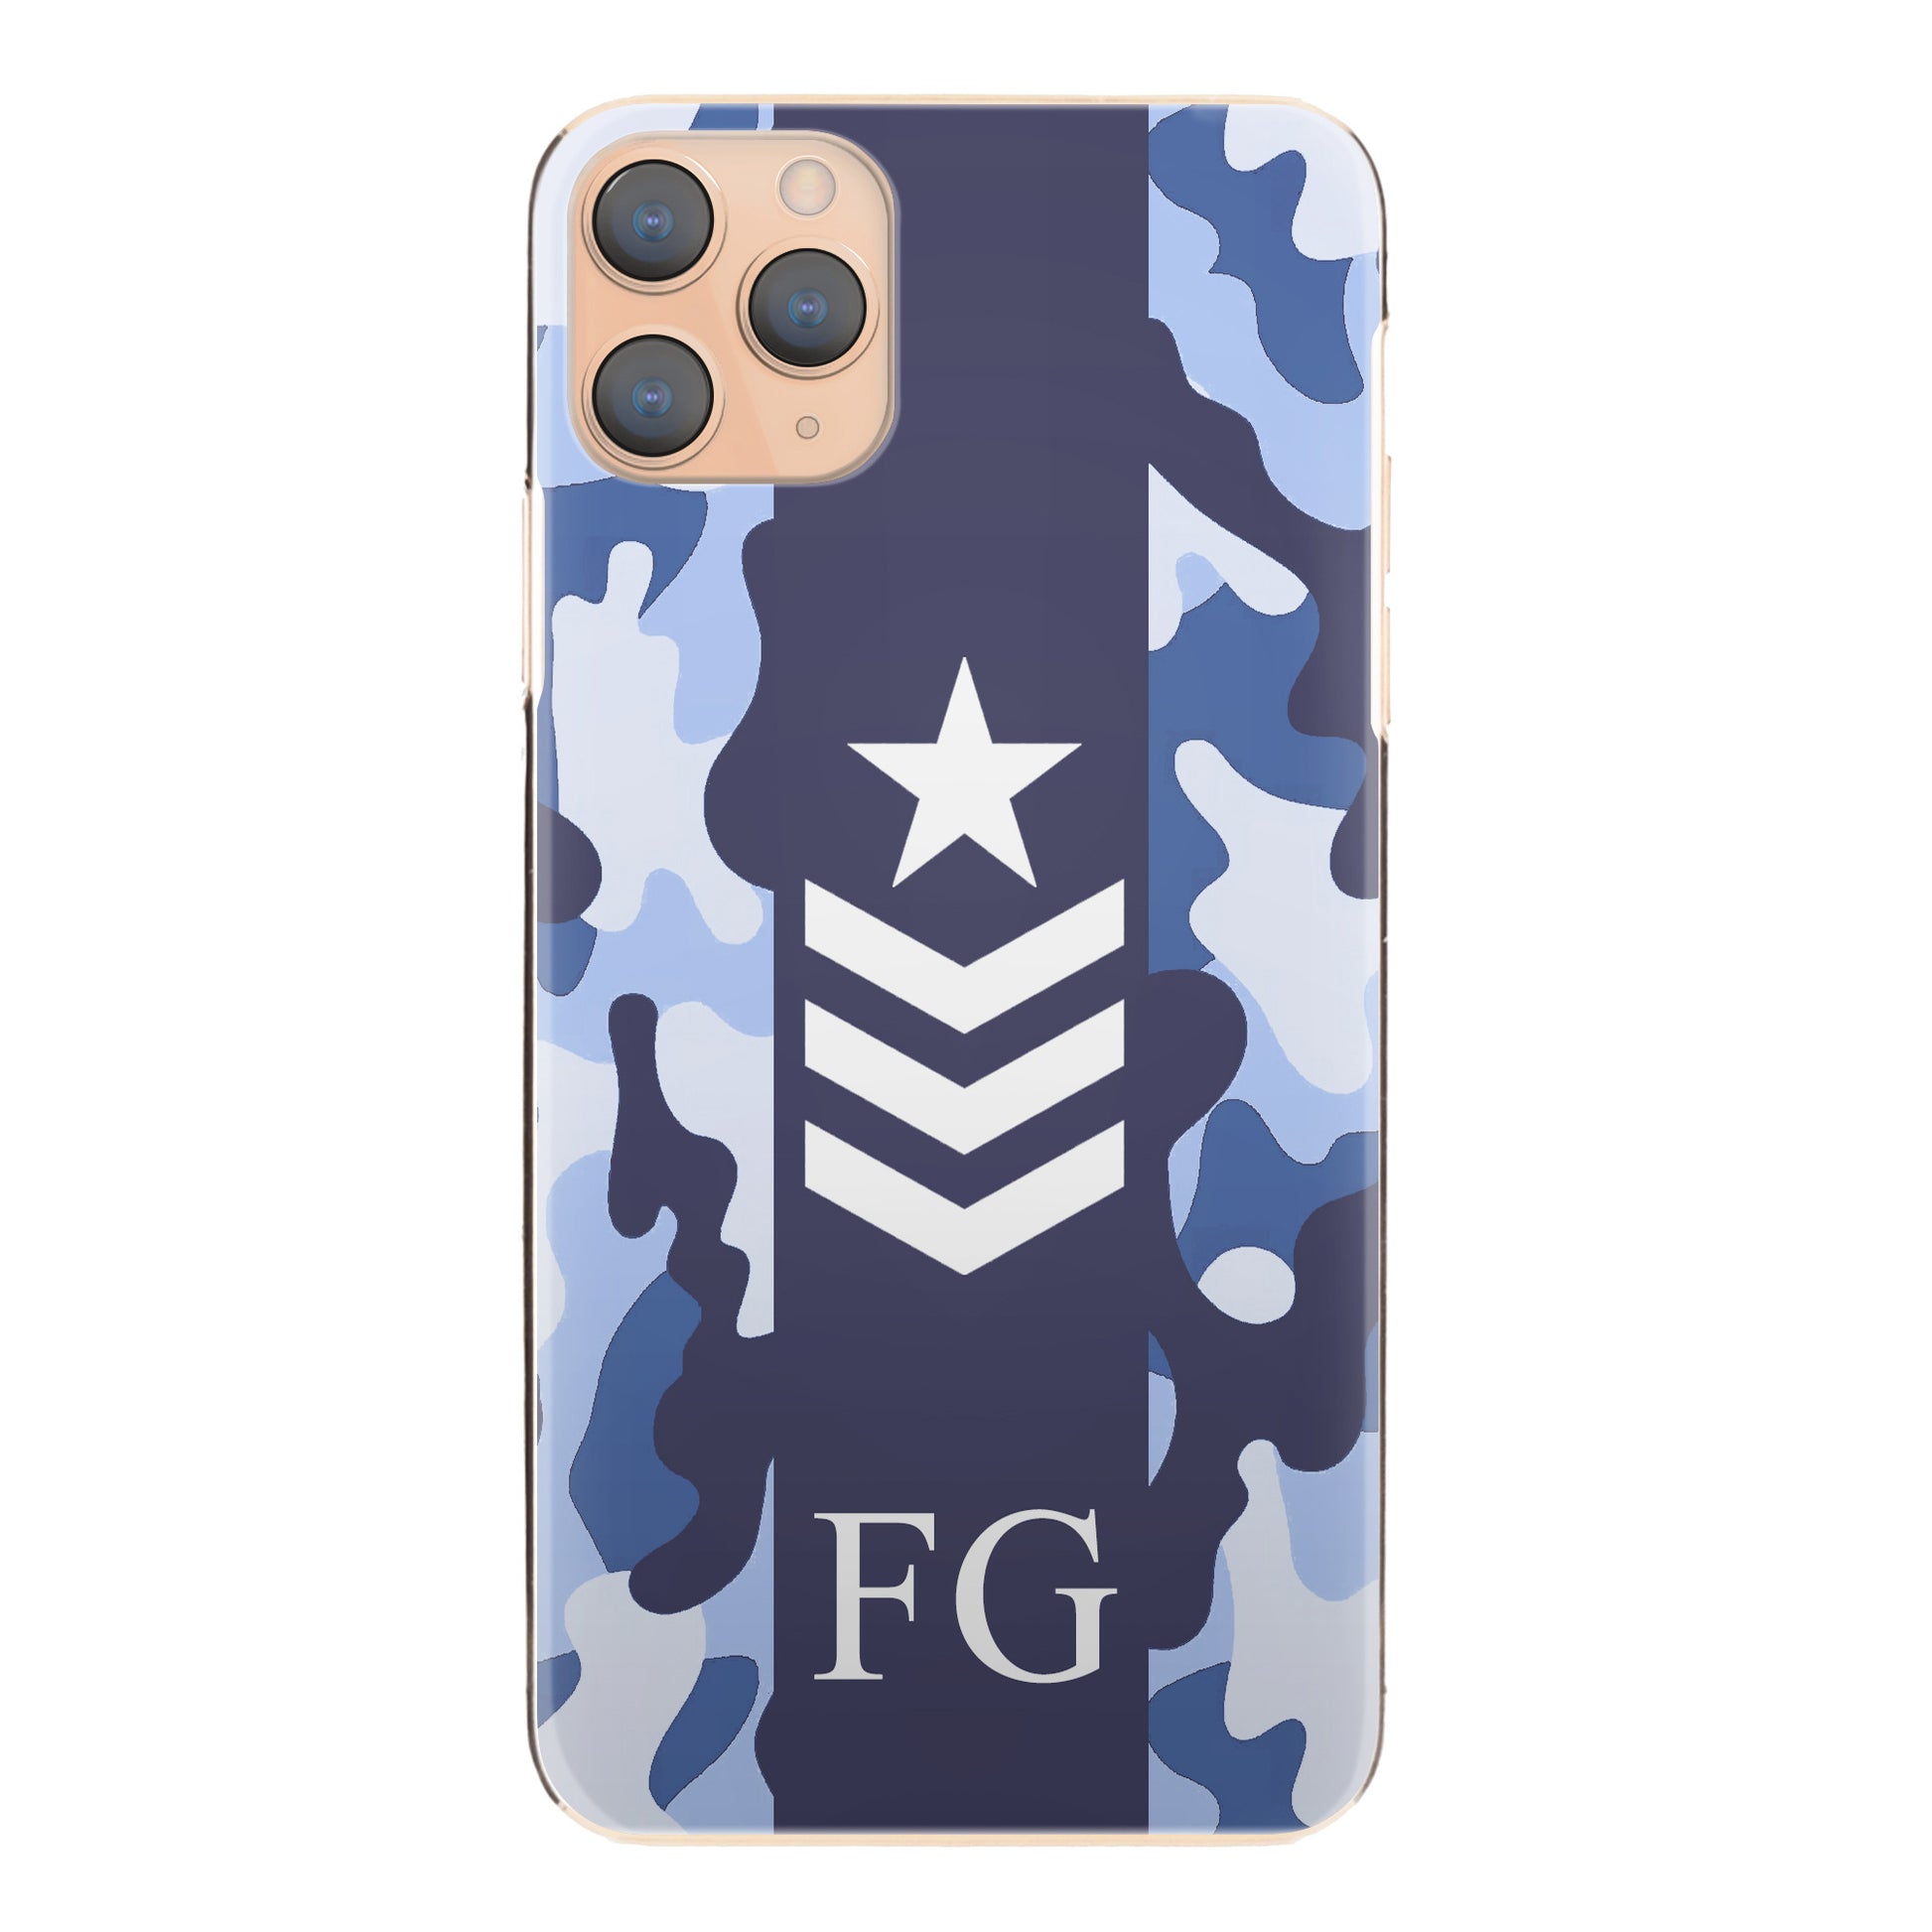 Personalised Xiaomi Phone Hard Case with Initials and Army Rank on Blue Camo